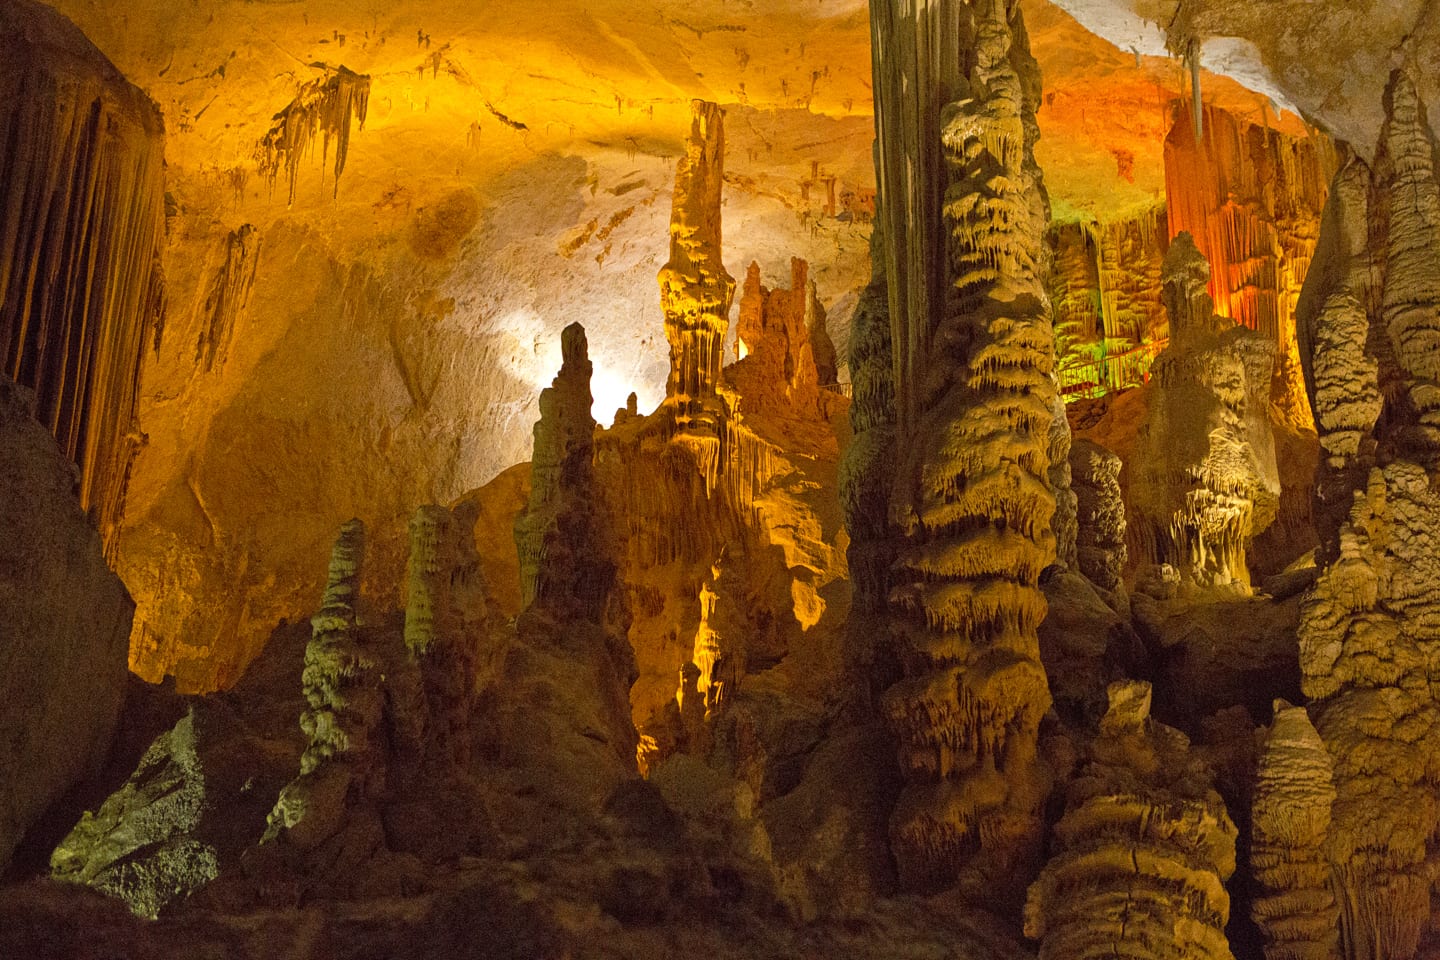 Inside Linville Caverns, NC